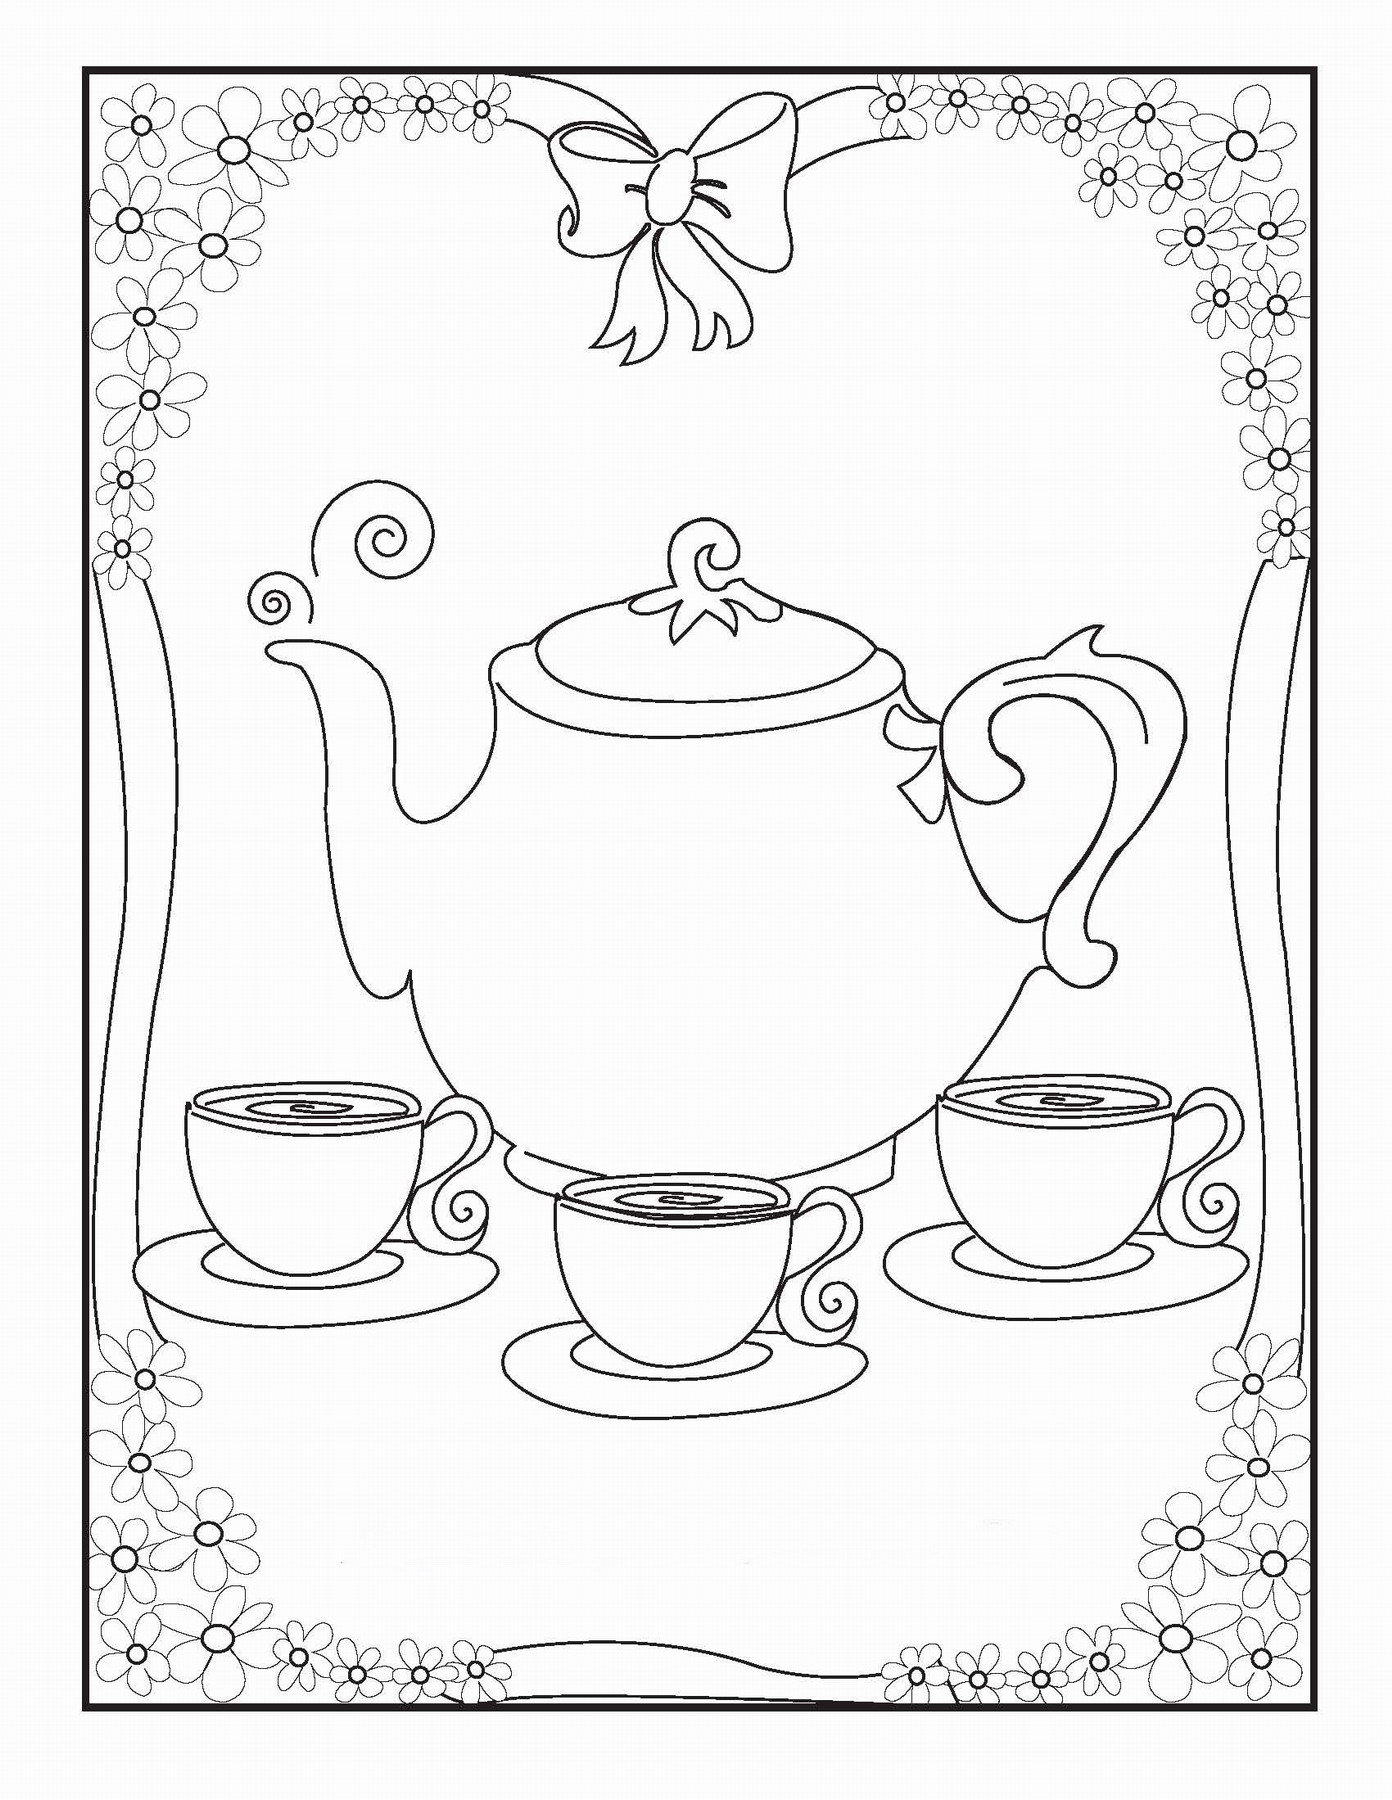 Download Tea Party Coloring Pages